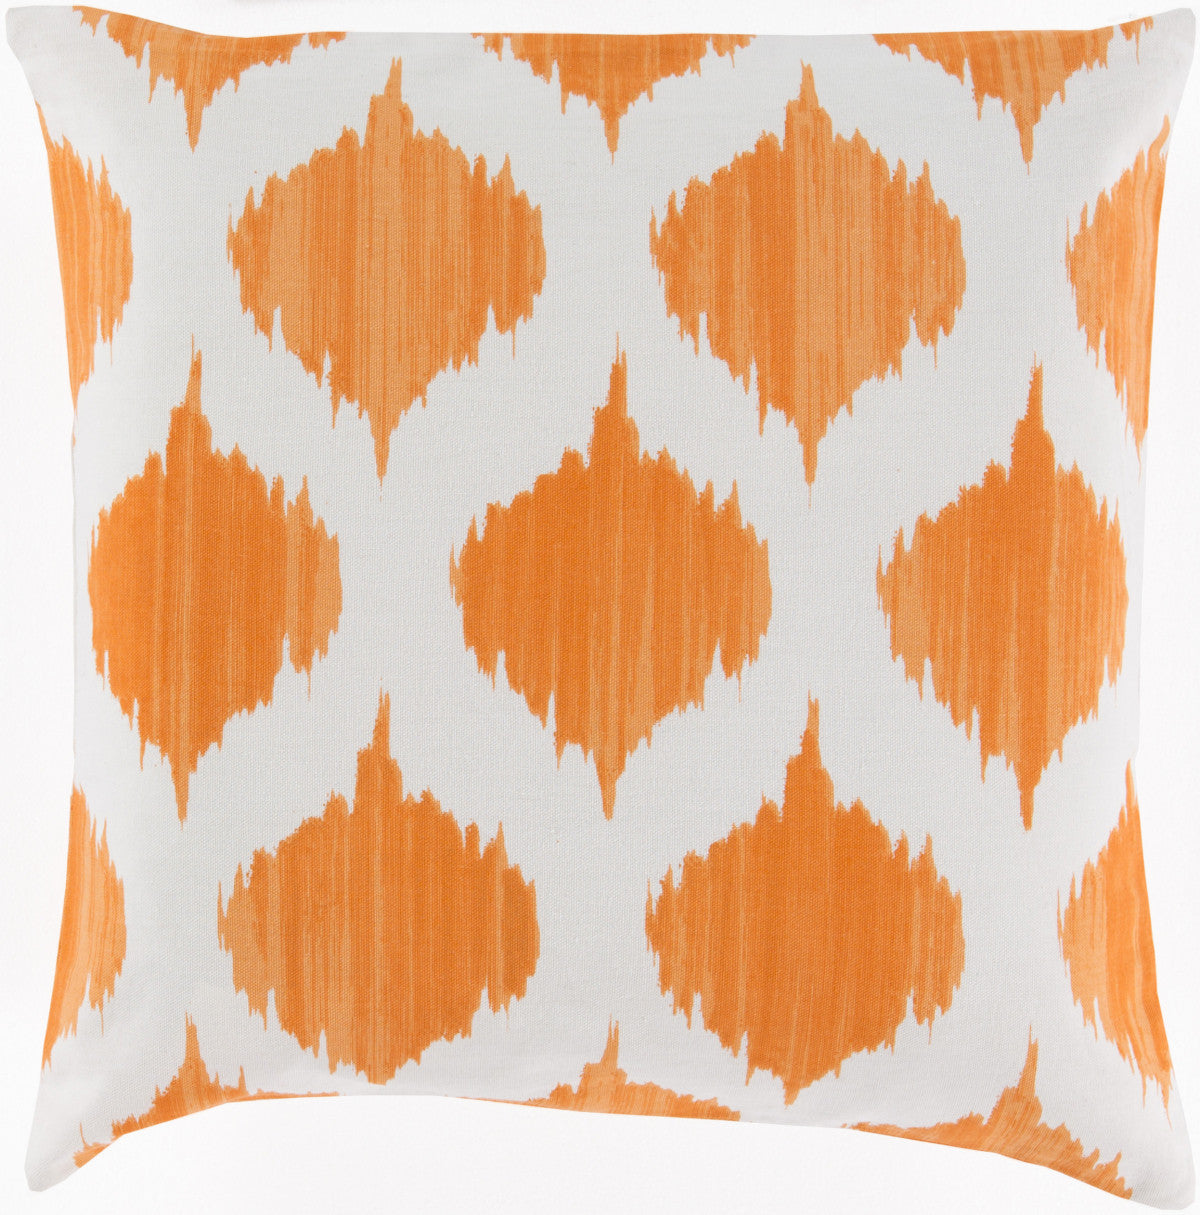 Surya Ogee Exquisite in Ikat SY-031 Pillow